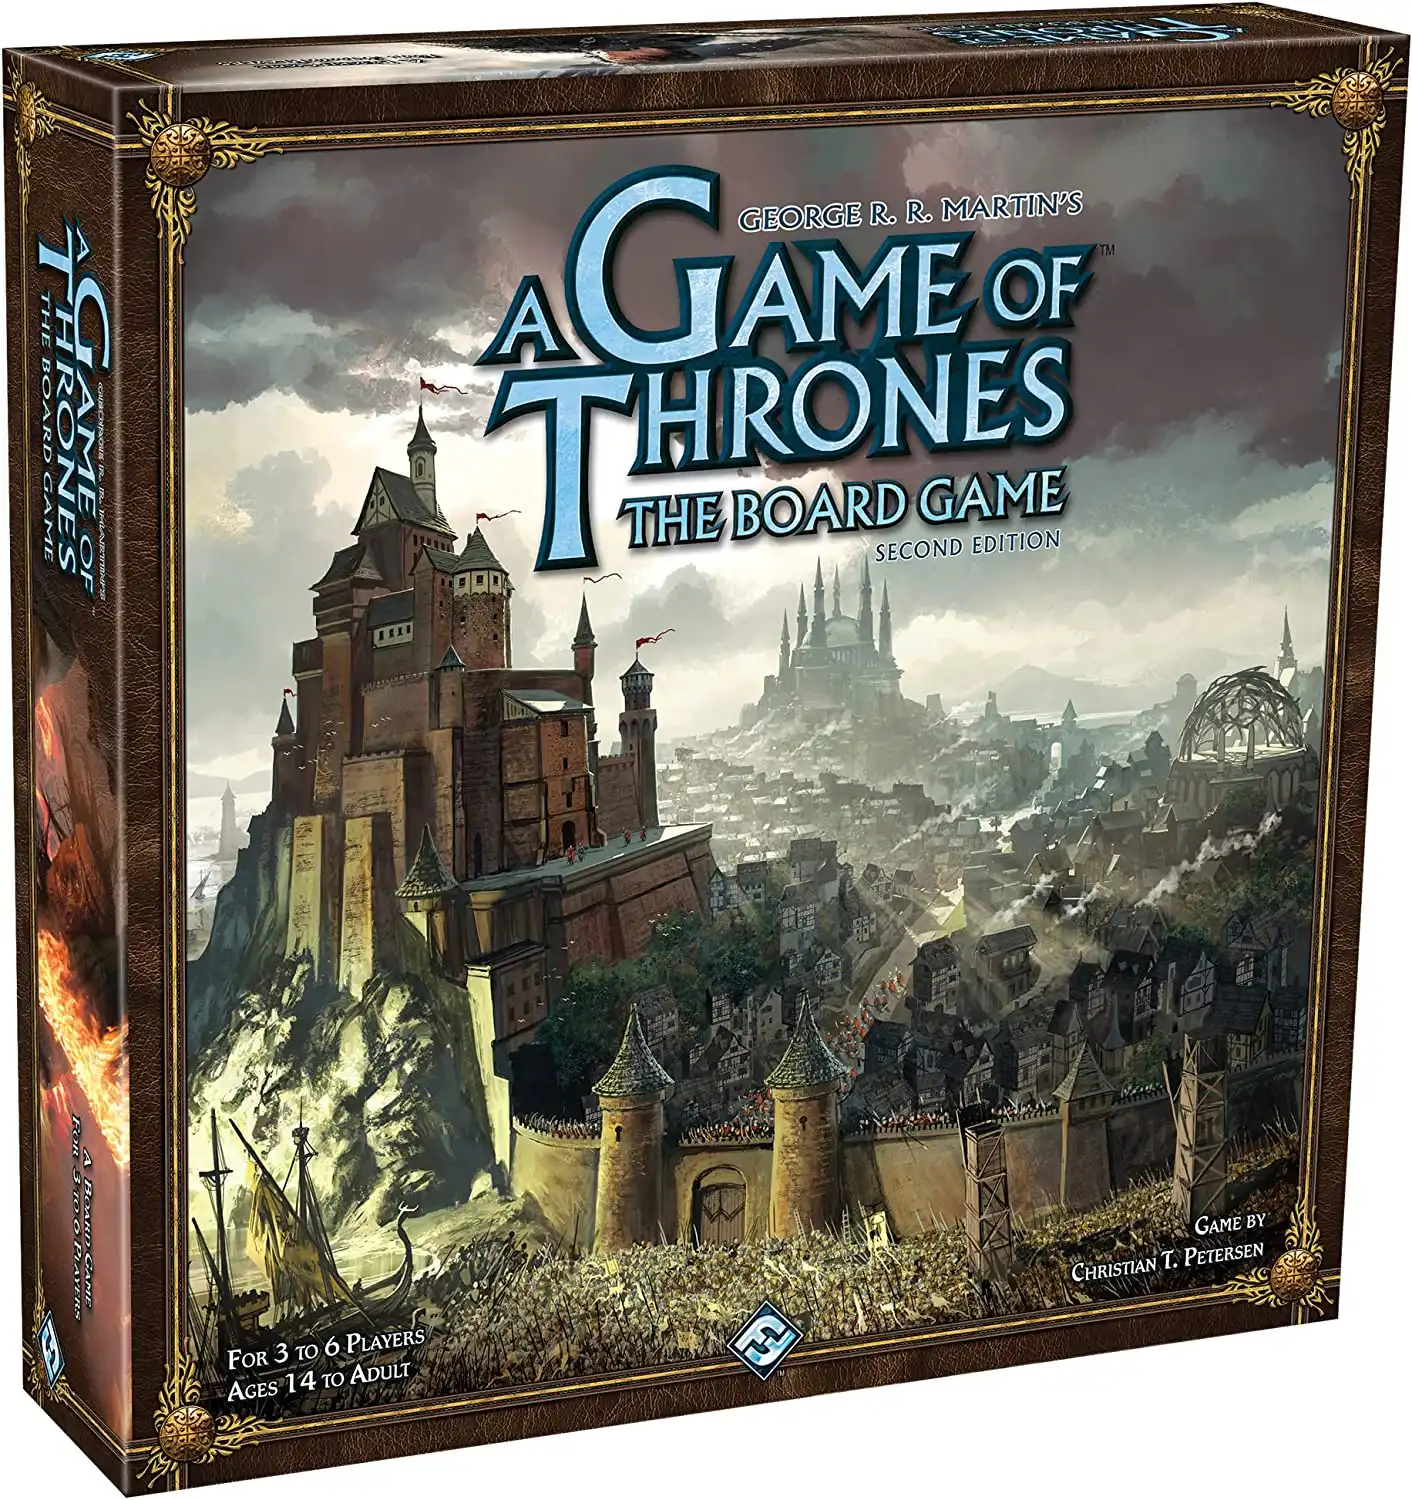 A Game of Thrones: The Board Game (Second Edition) (2011) box